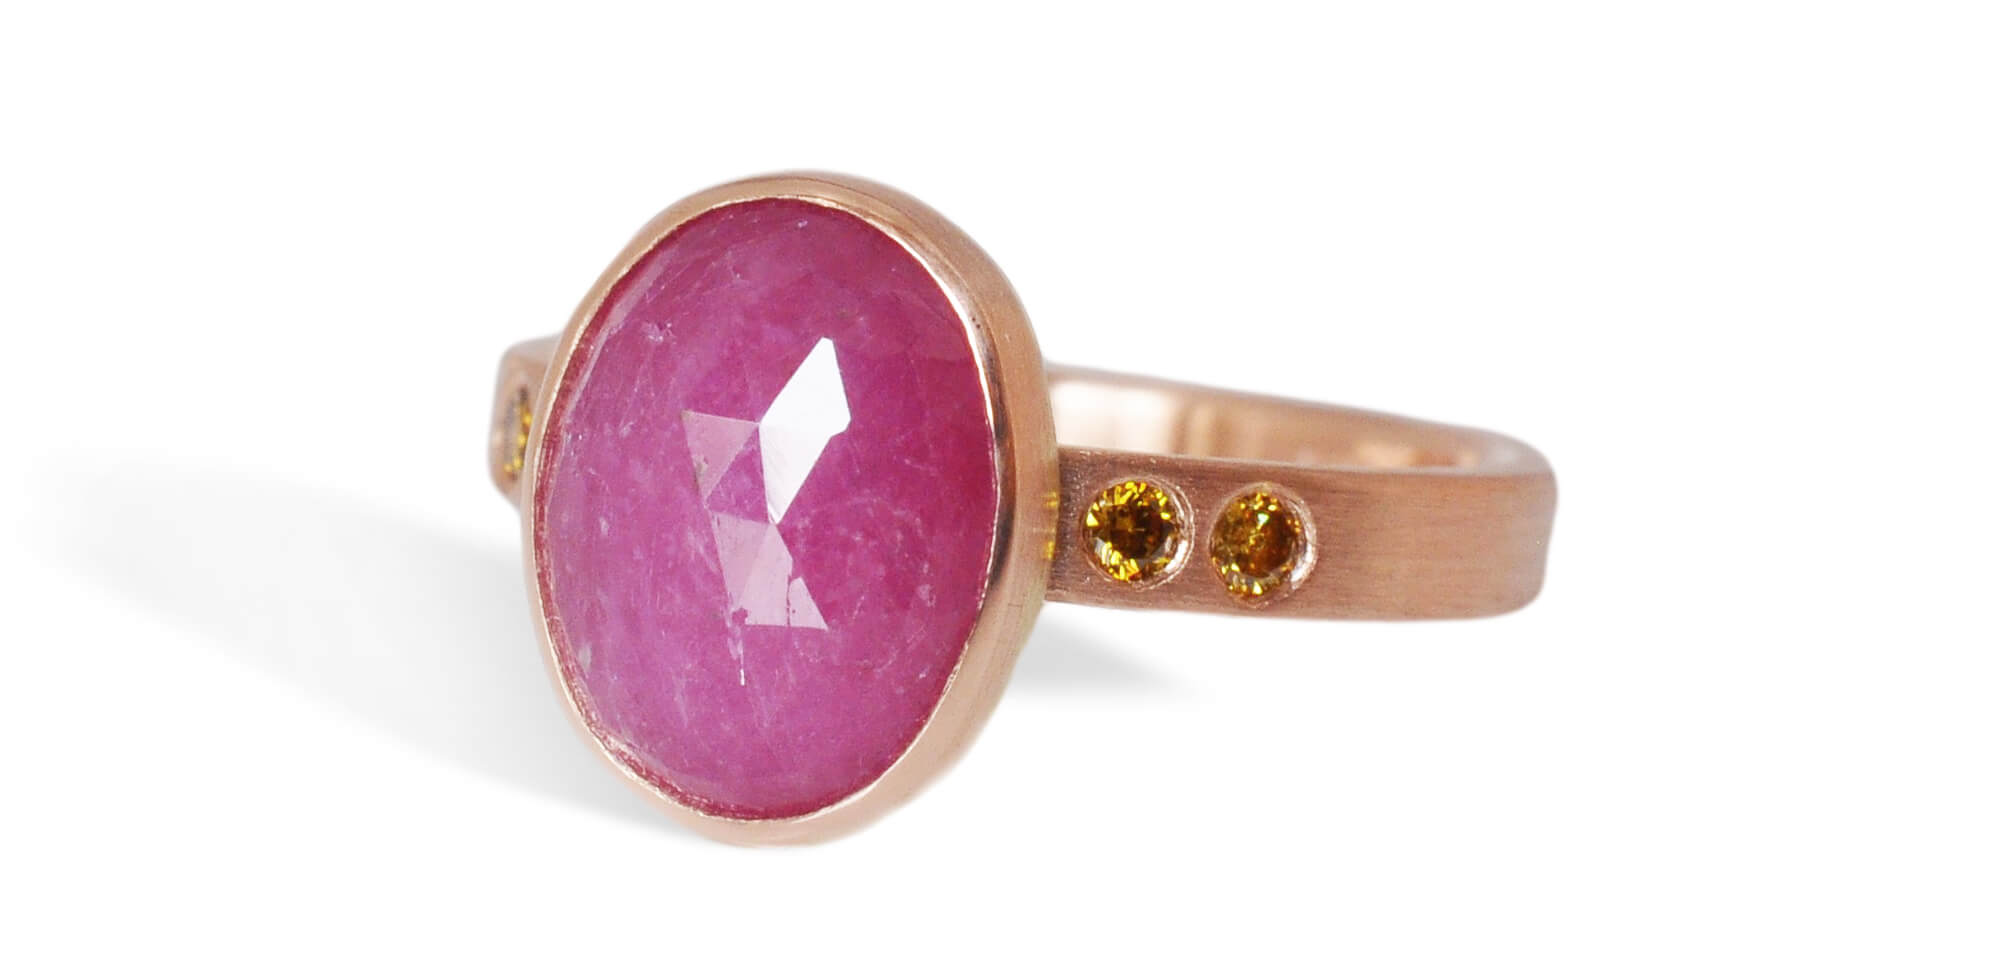 Custom pink sapphire and diamond ring in recycled red gold from EC Design in Minneapolis, MN.